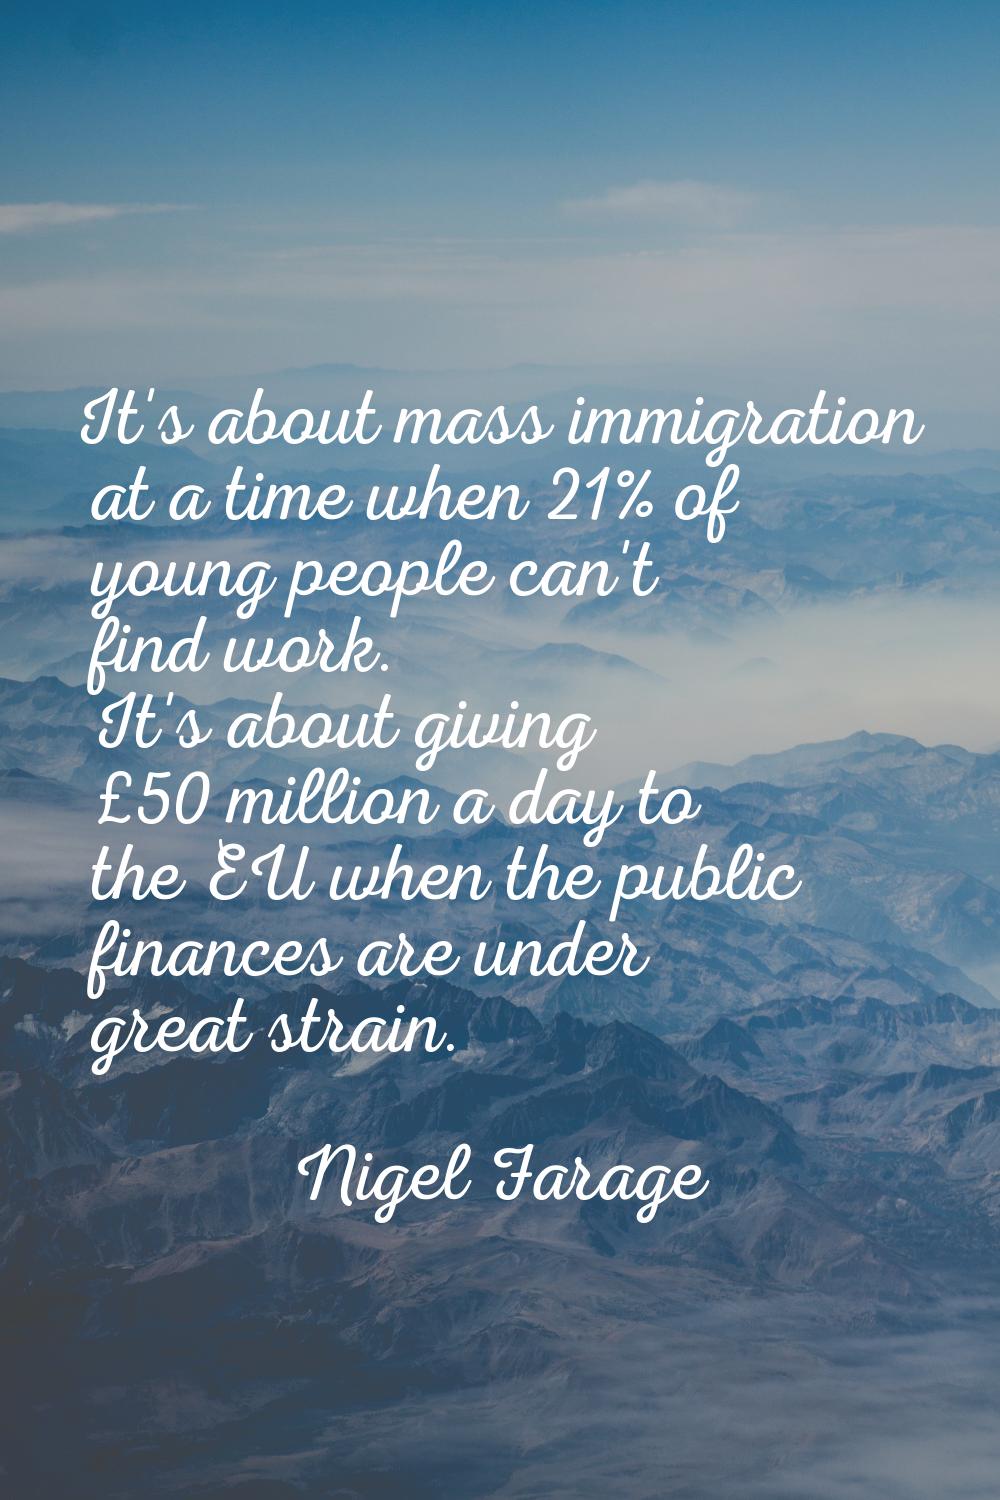 It's about mass immigration at a time when 21% of young people can't find work. It's about giving £